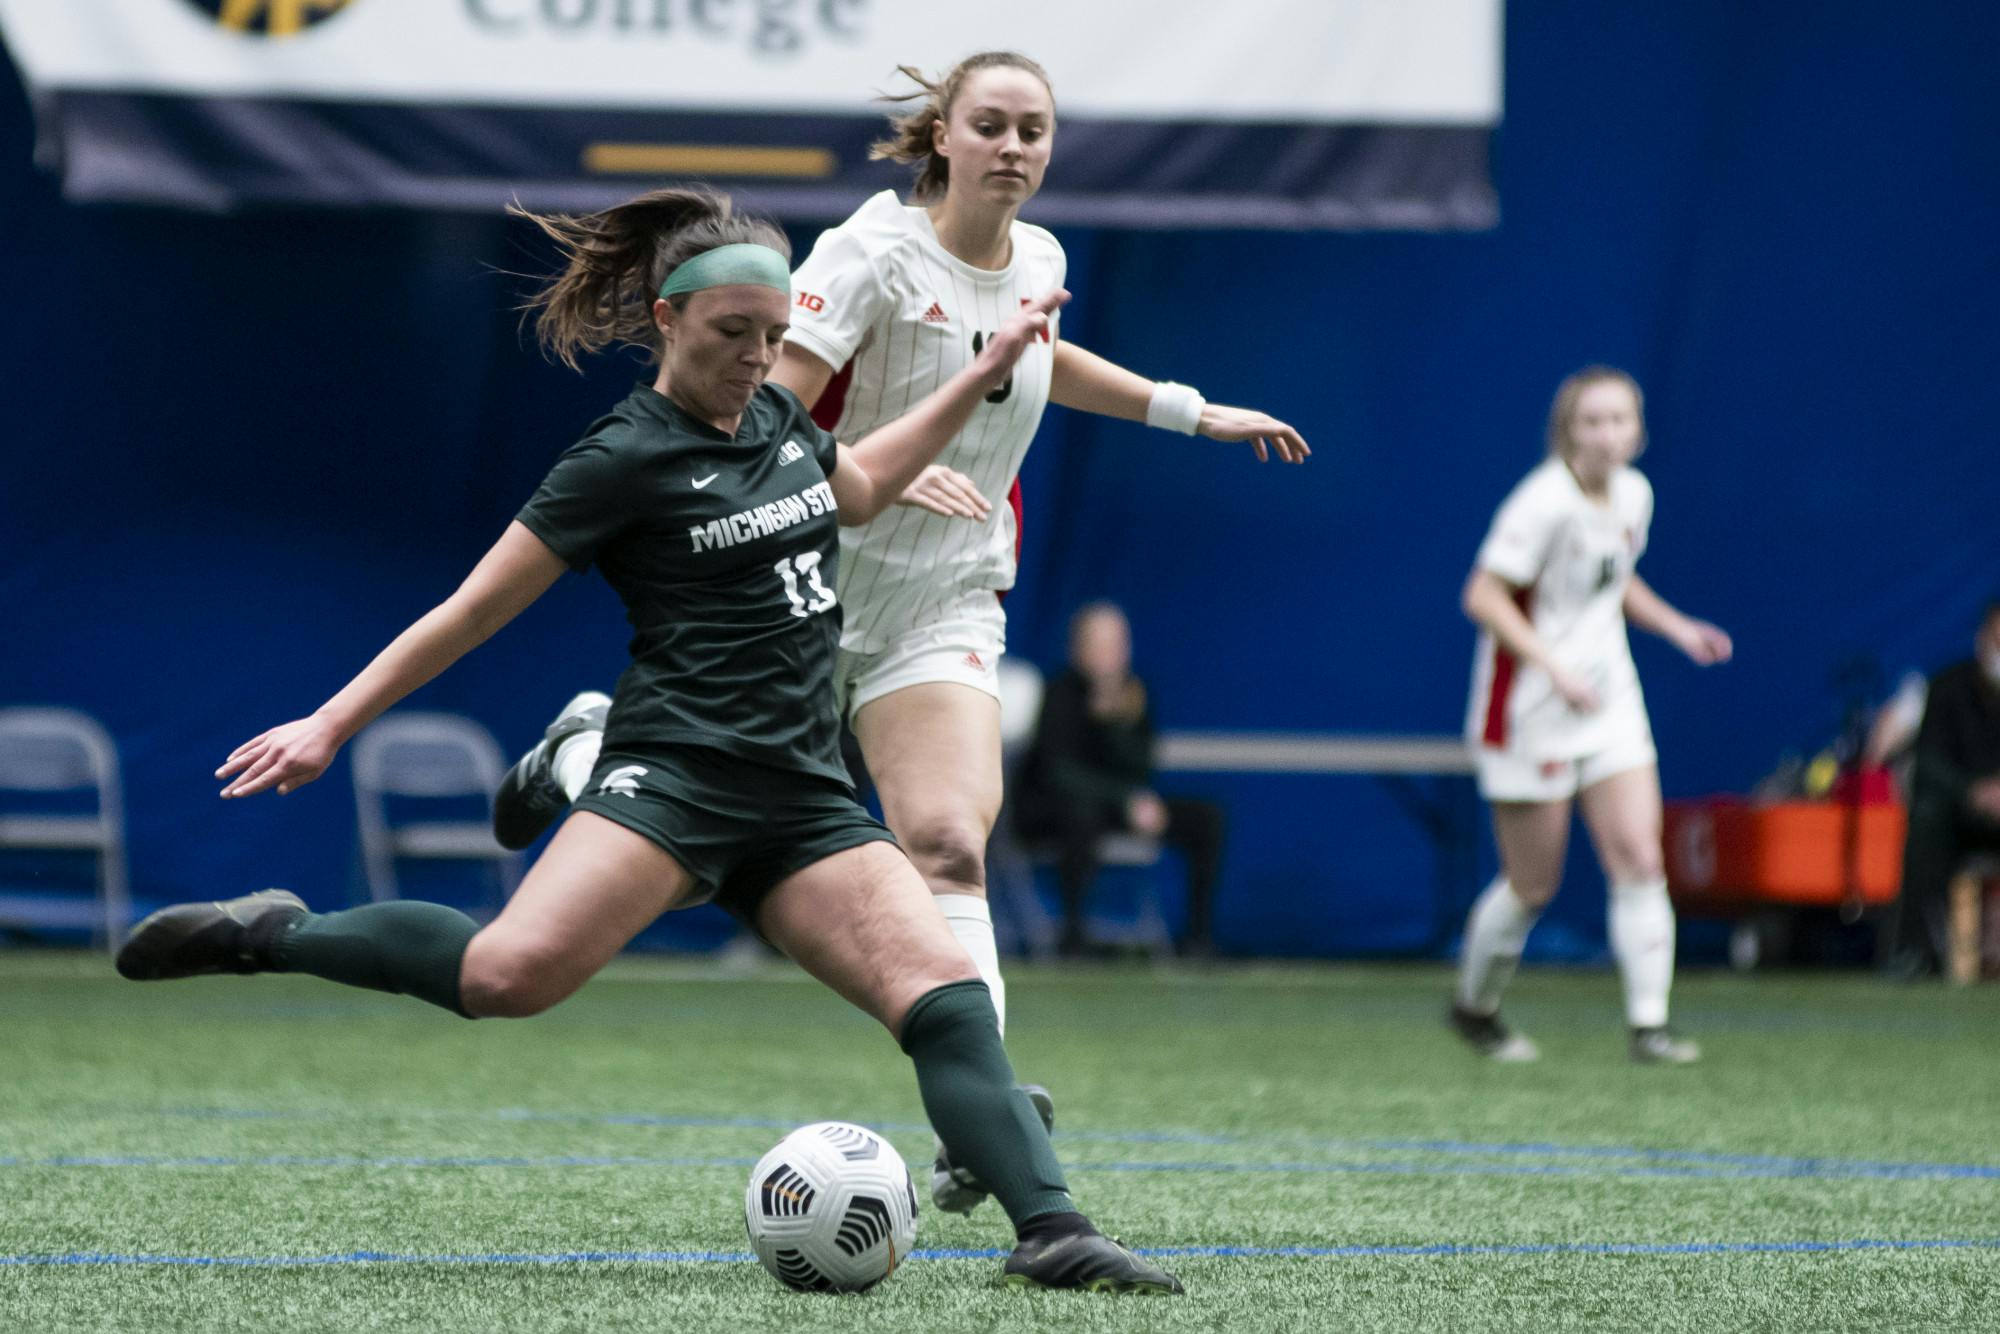 Senior defense Athena Biondi (13) kicks the ball during the game against Nebraska on February 25, 2021, at The St. Joe's Sports Dome. The Spartans defeated the Cornhuskers 2-0.